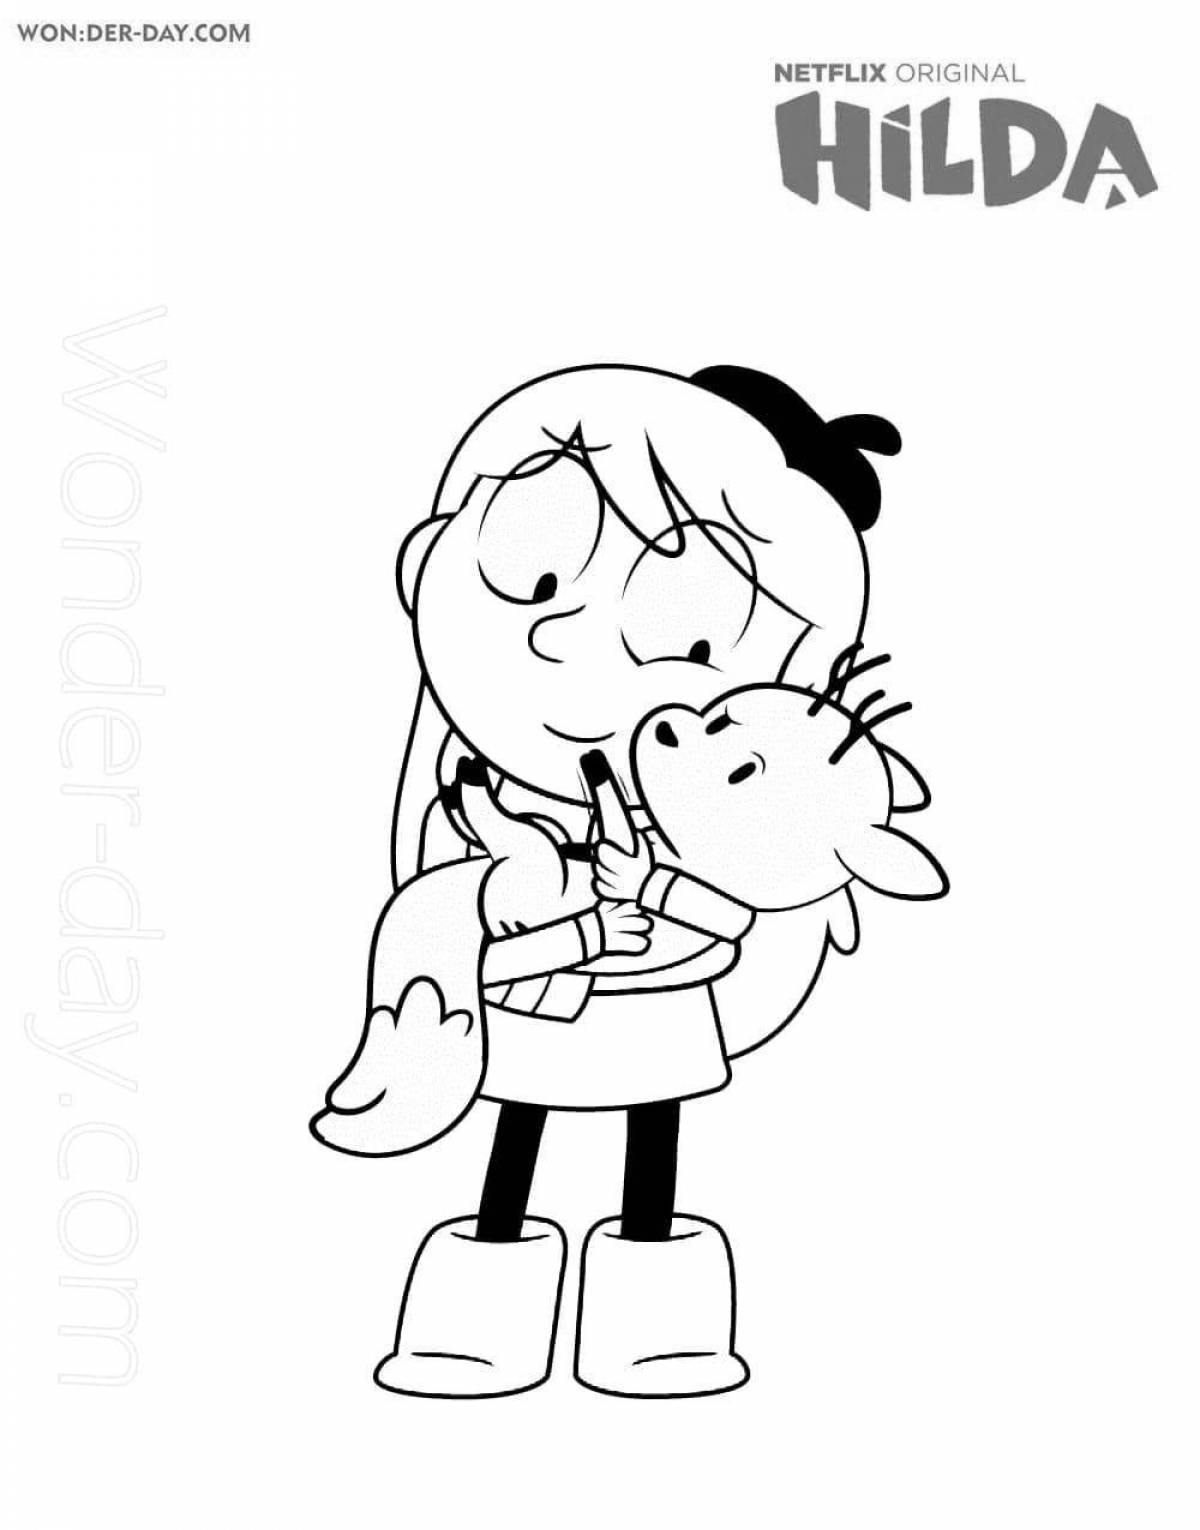 Hilda's animated coloring page